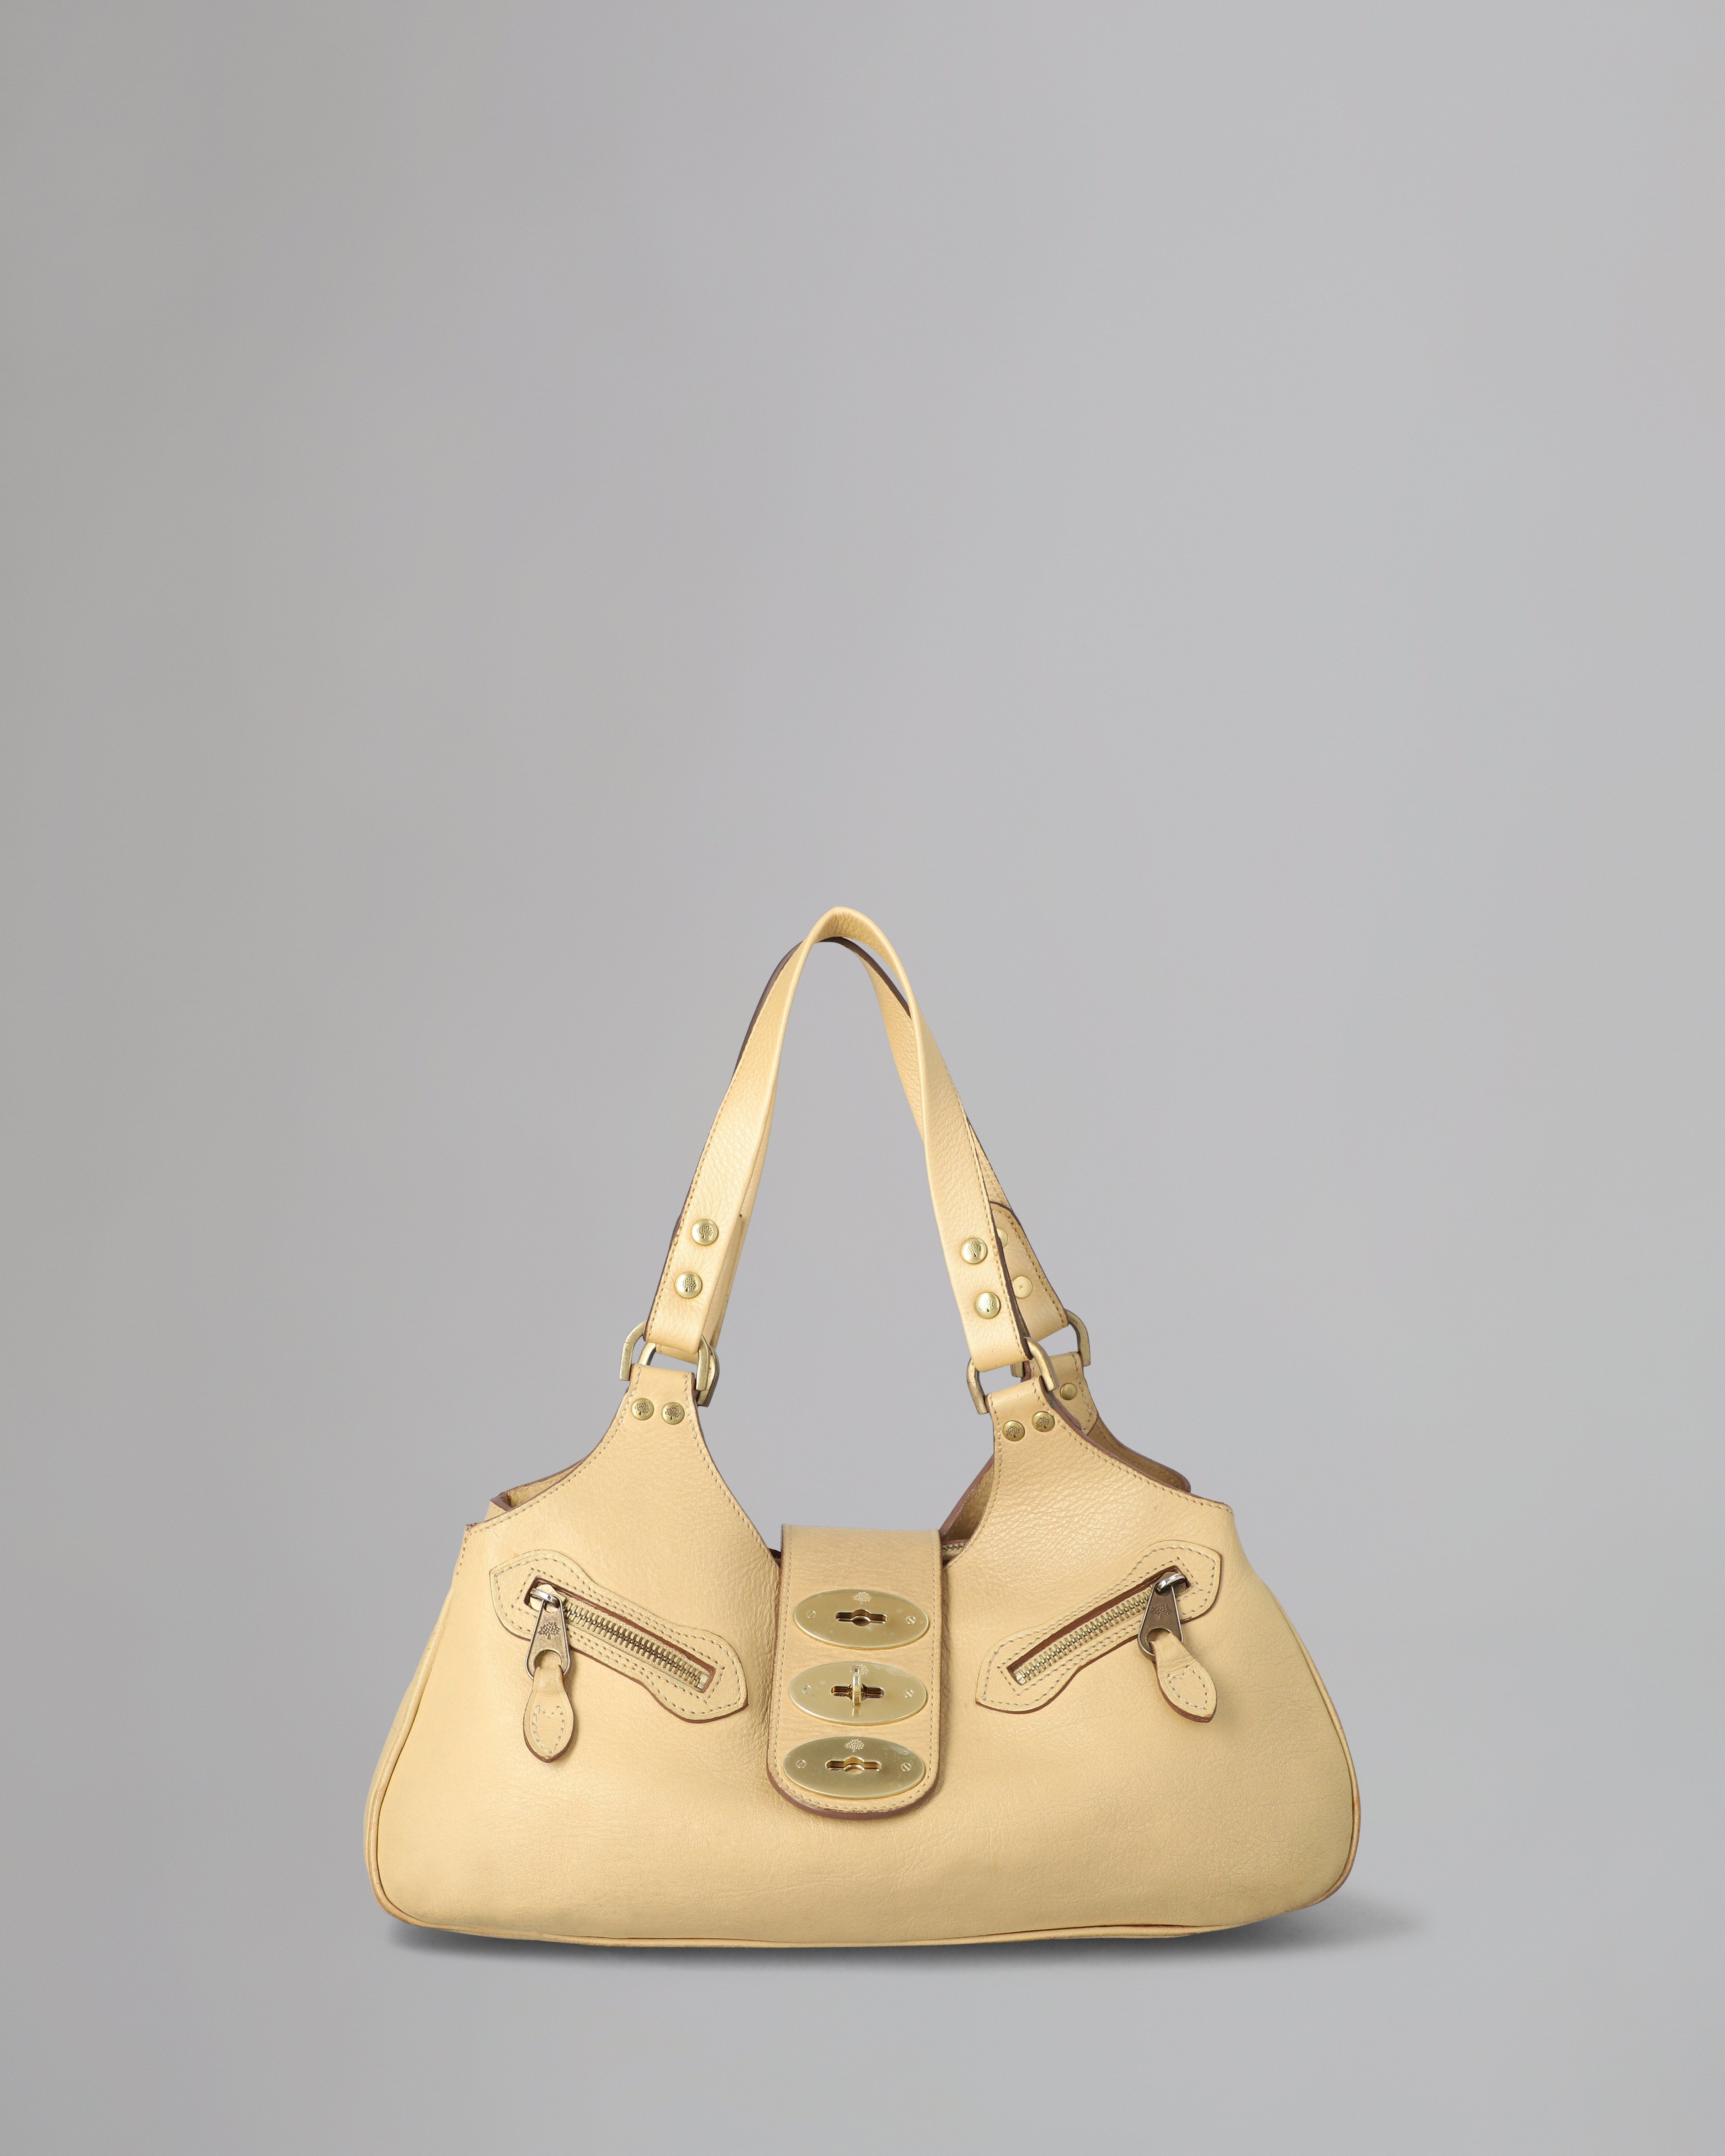 Pre-Loved Women's Bags, Preowned Bags